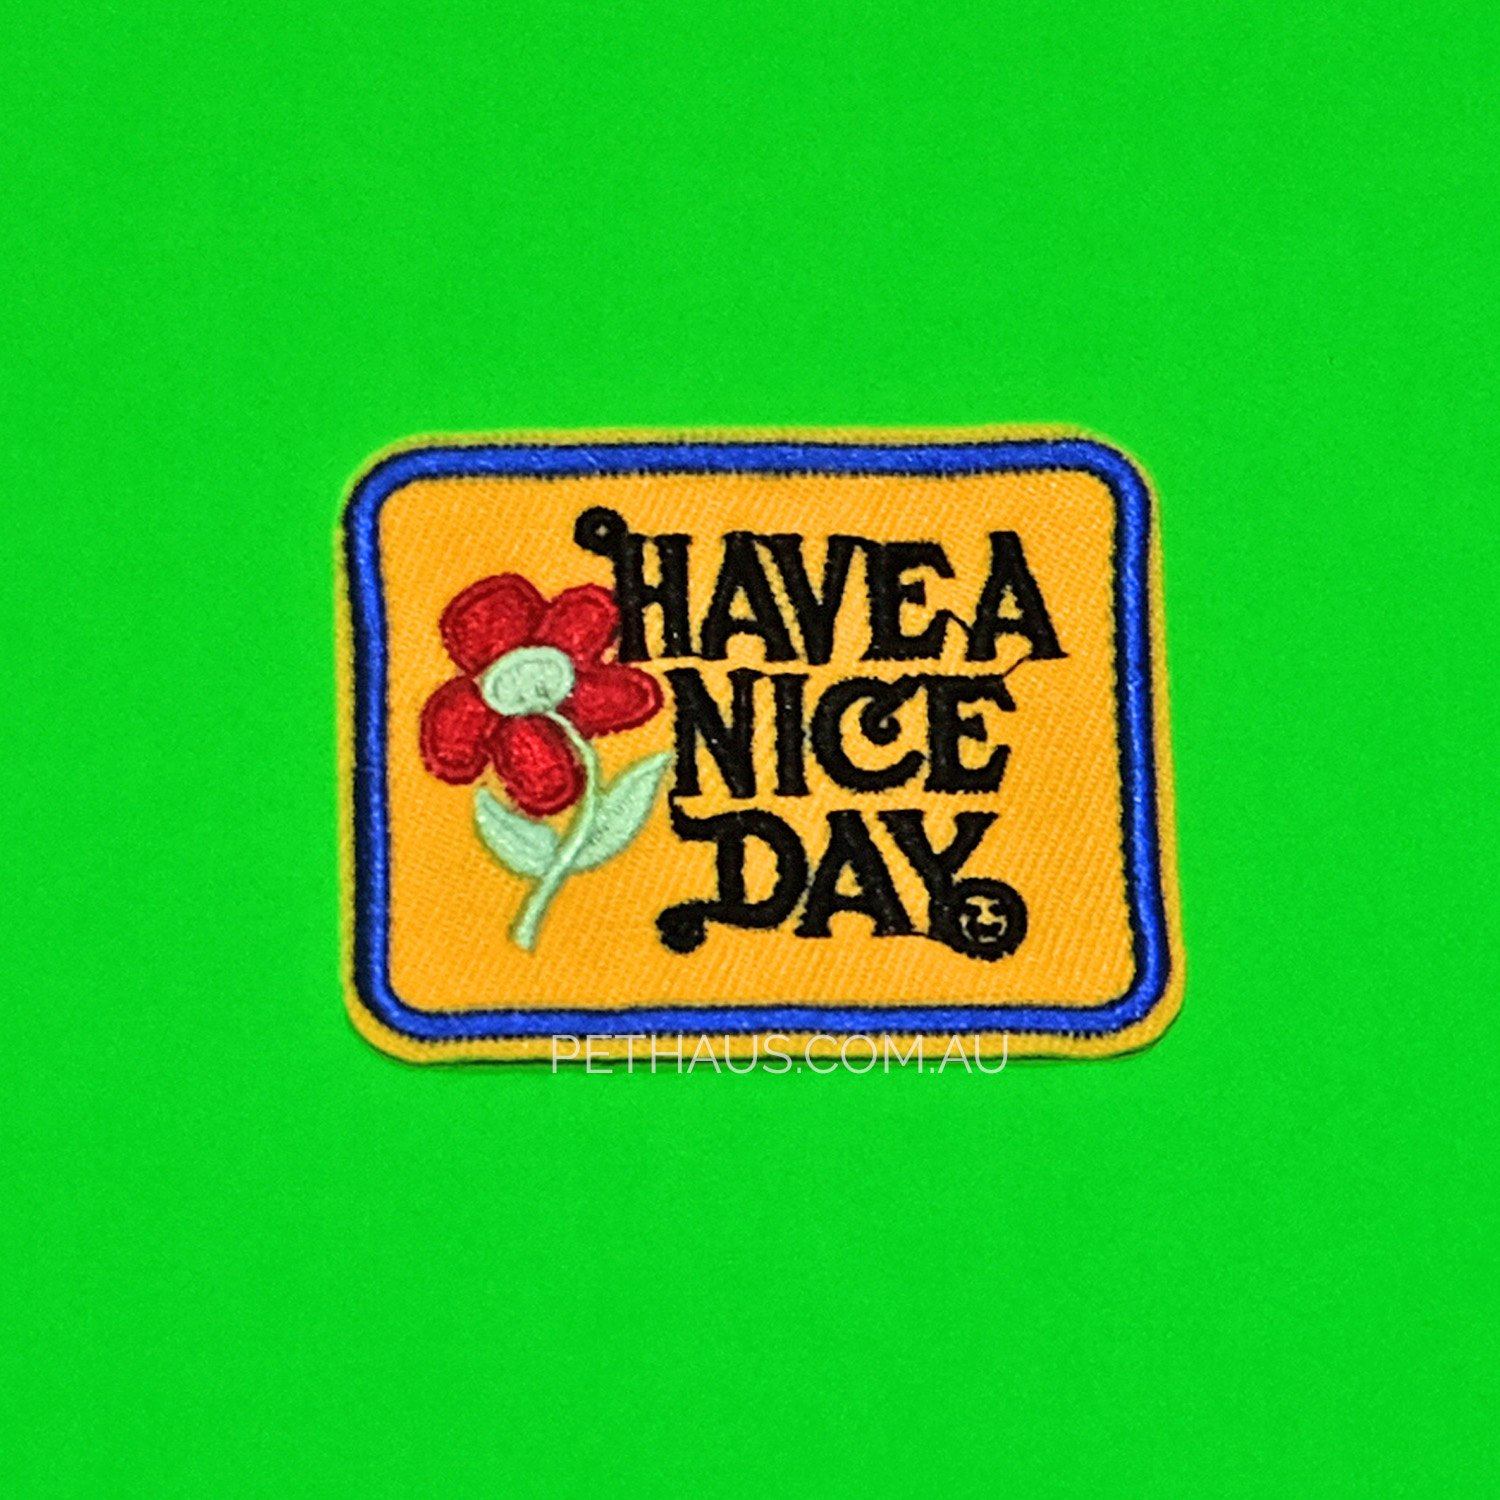 Have a nice day  Patch, 70's Patch, Vintage Patch, Cute Patch, Patch for dog